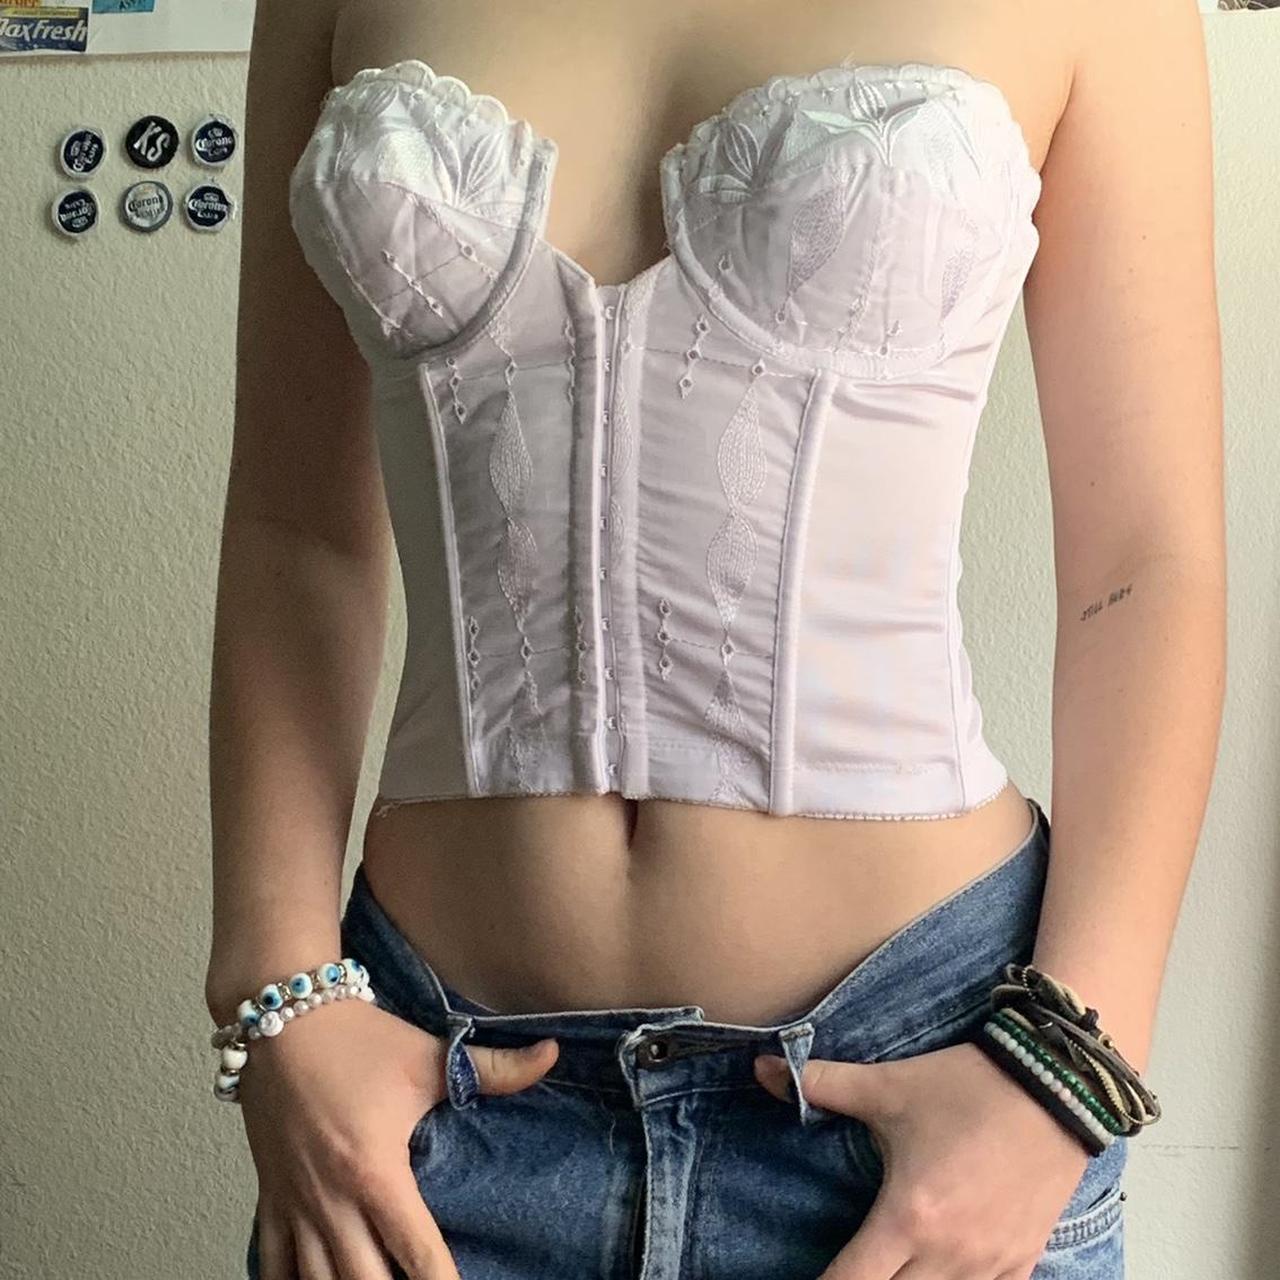 Woman Wearing Corset by Unknown